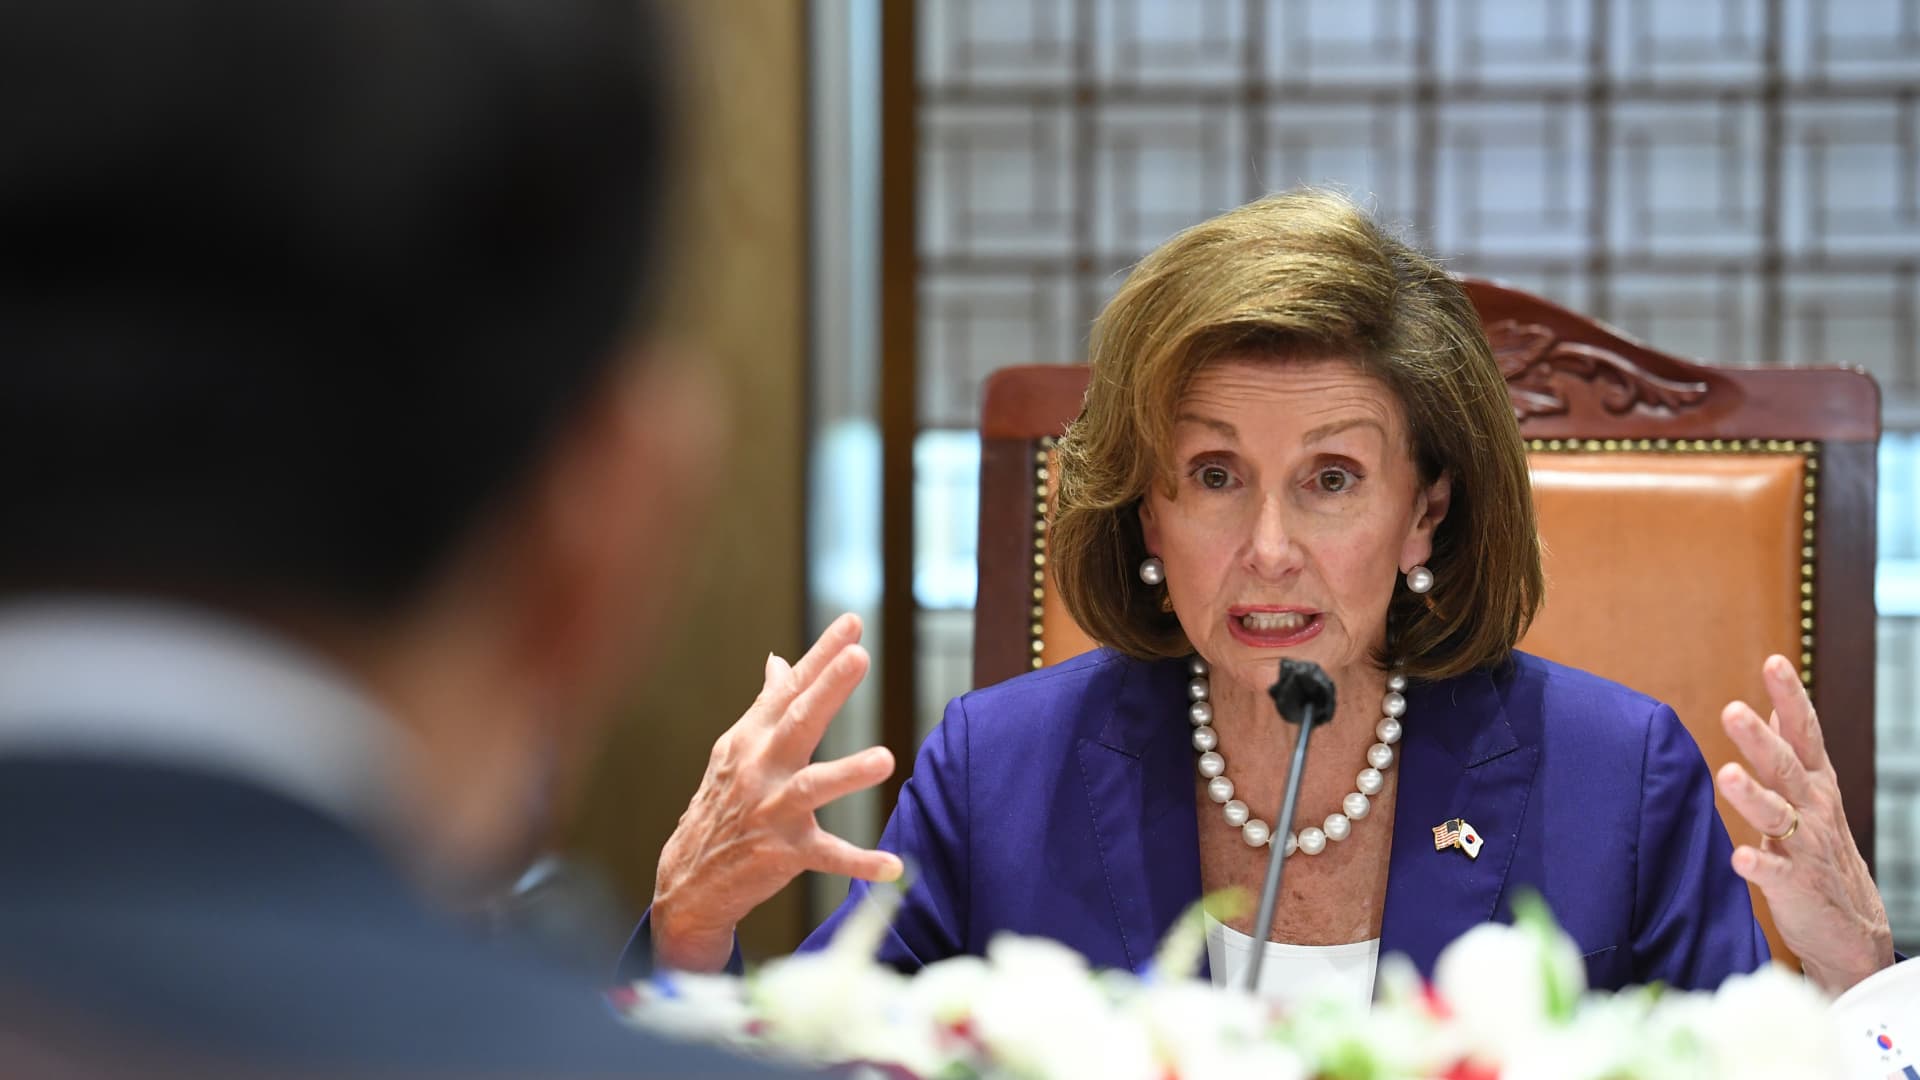 China sanctions Pelosi over trip to Taiwan, says visit was an 'egregious provocation'